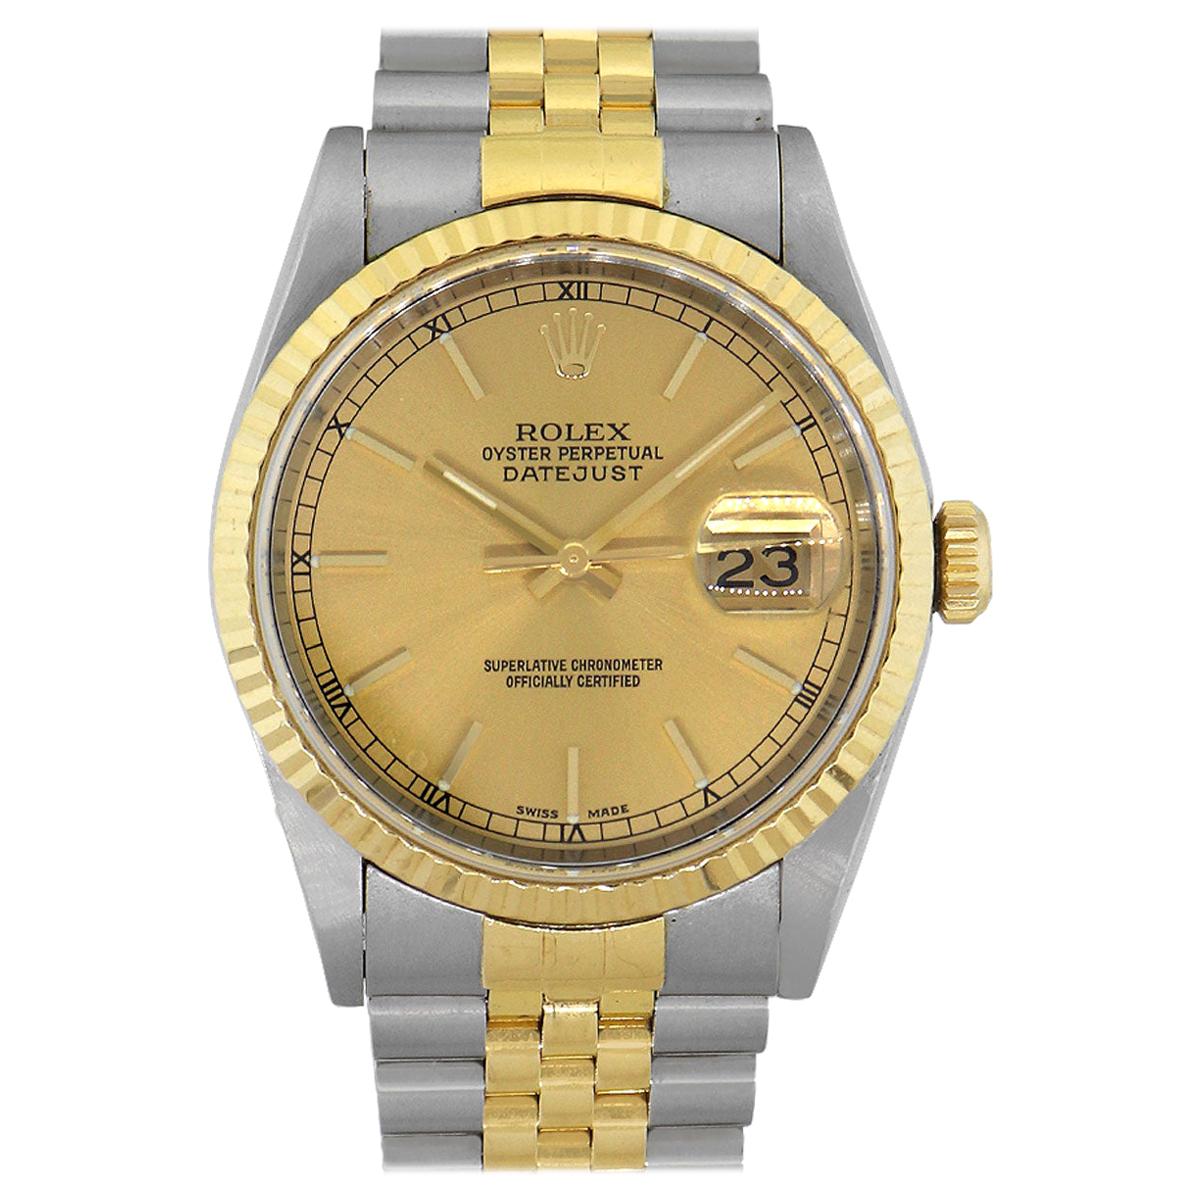 Rolex 16233 Datejust Champagne Dial Watch